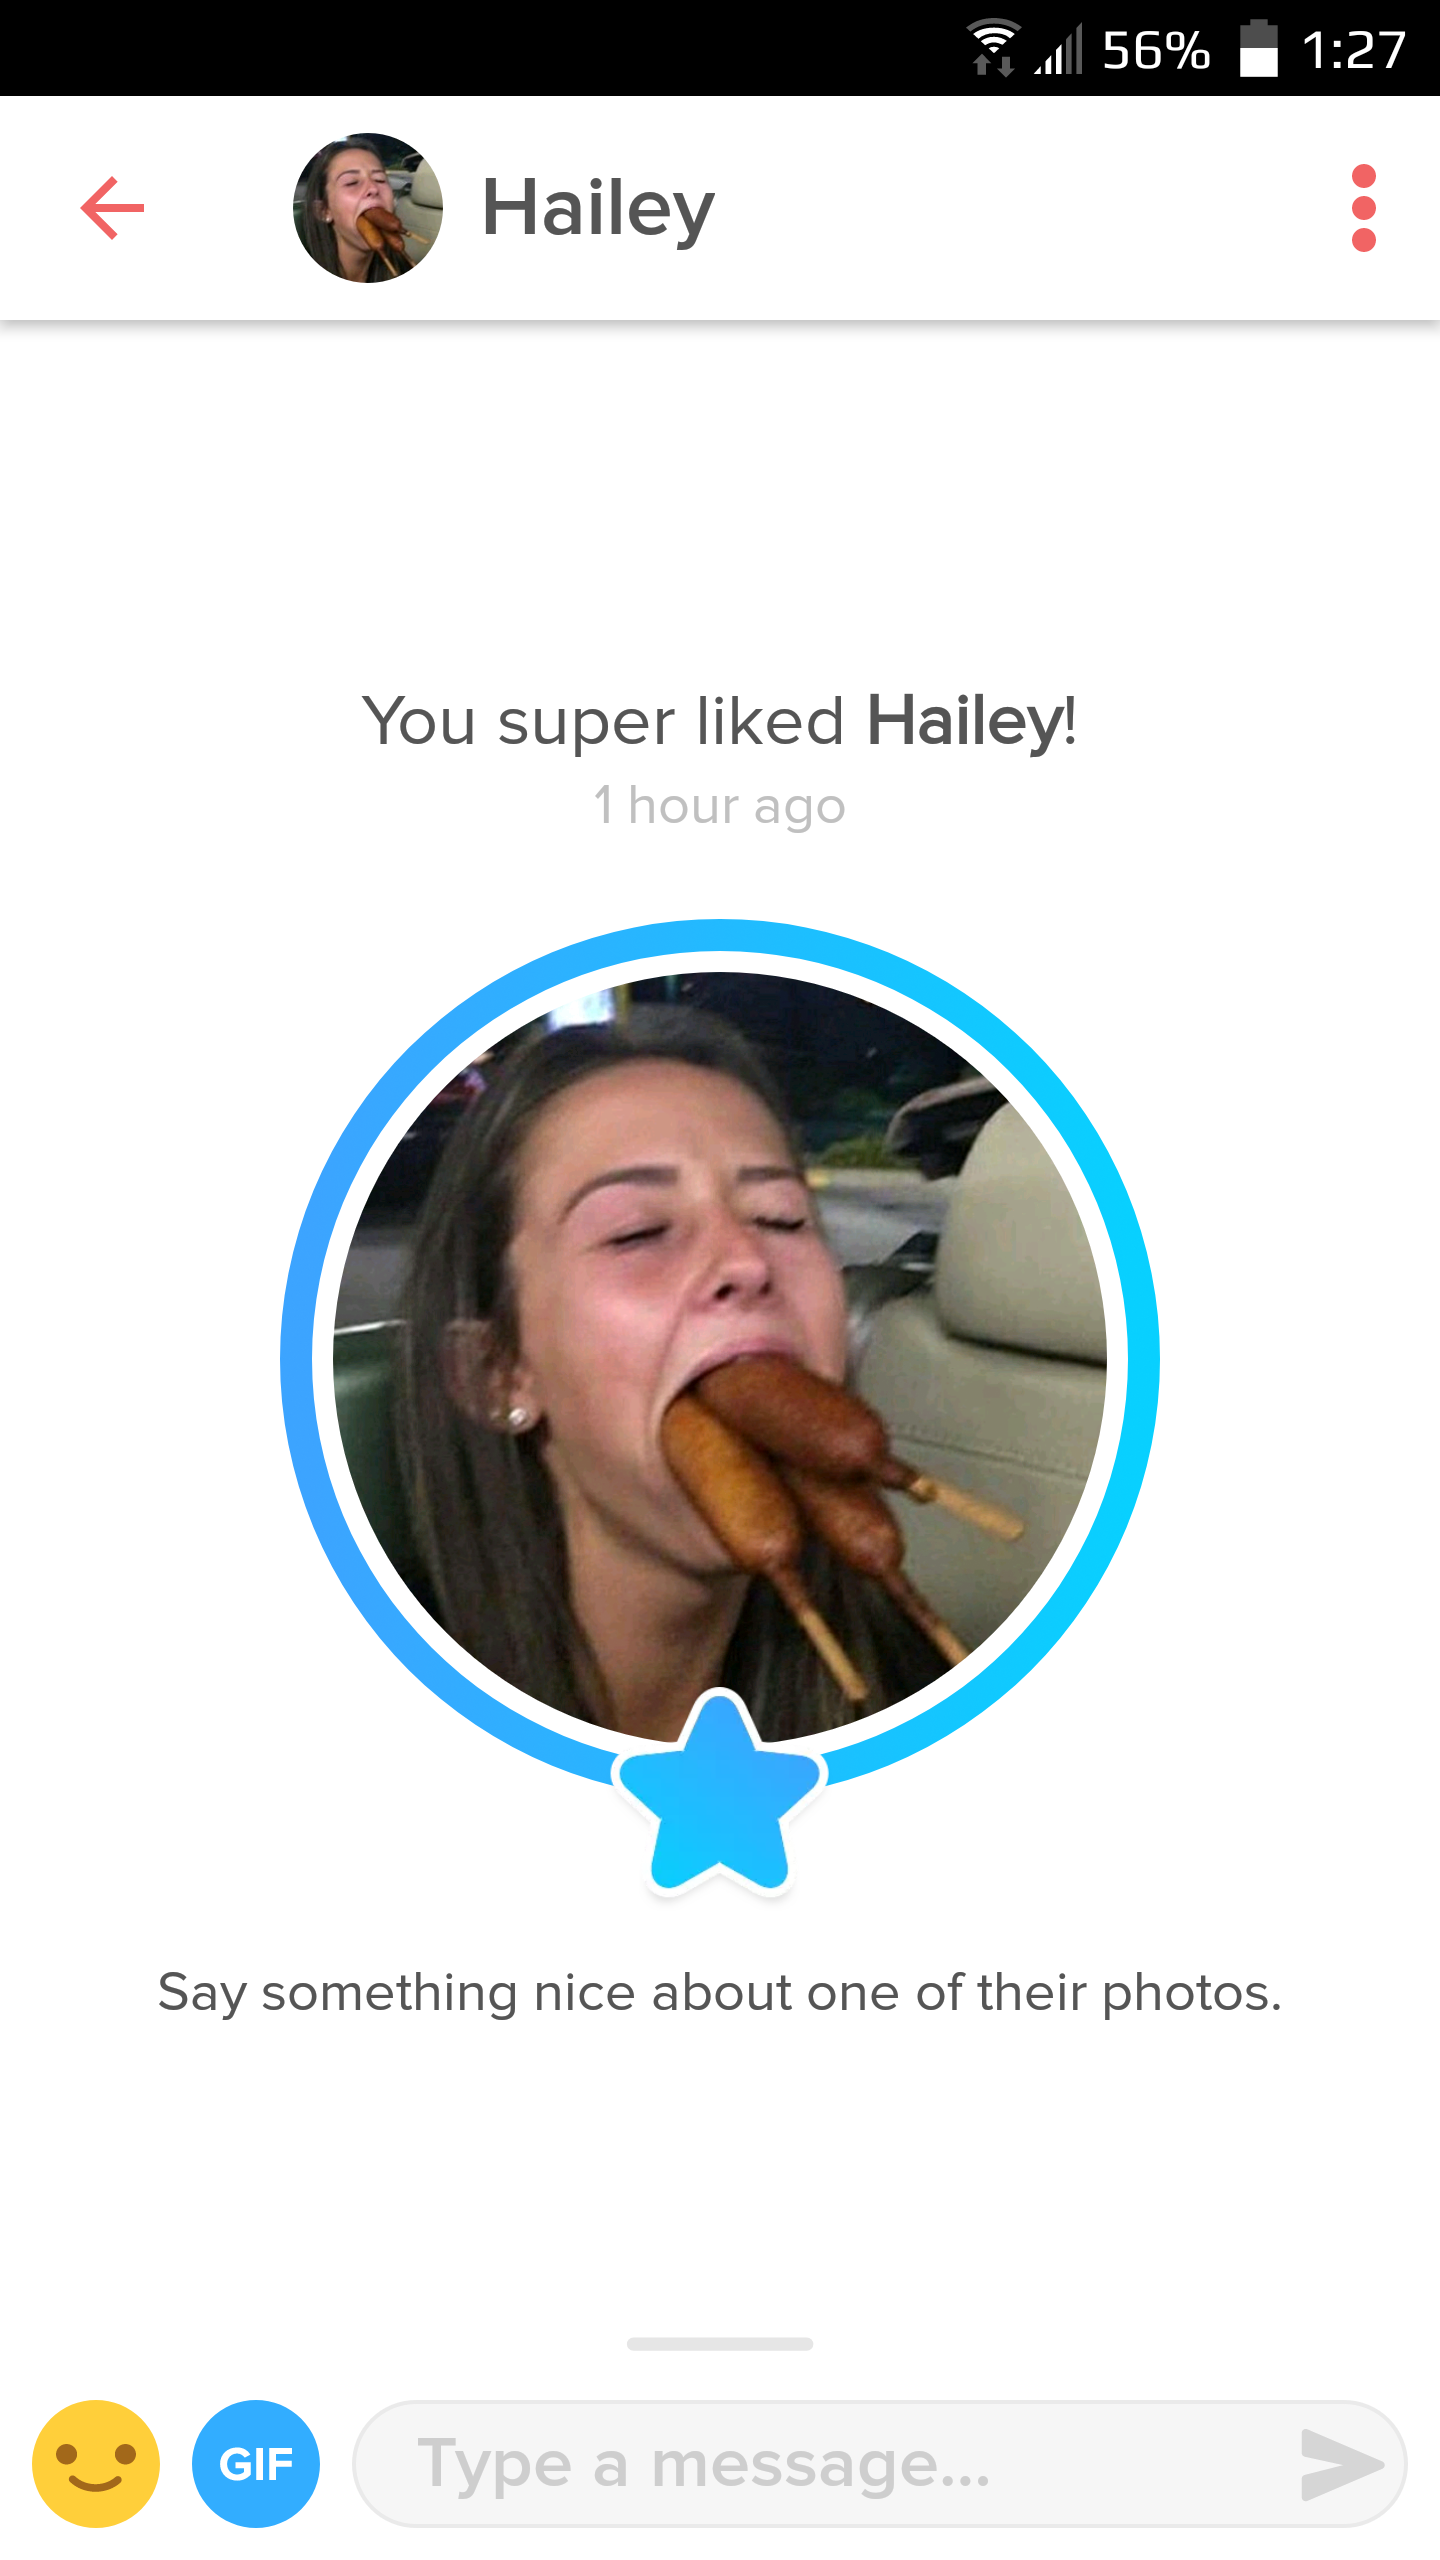 memes - mouth - 56%. Hailey You super d Hailey! 1 hour ago Say something nice about one of their photos. Gif Type a message...